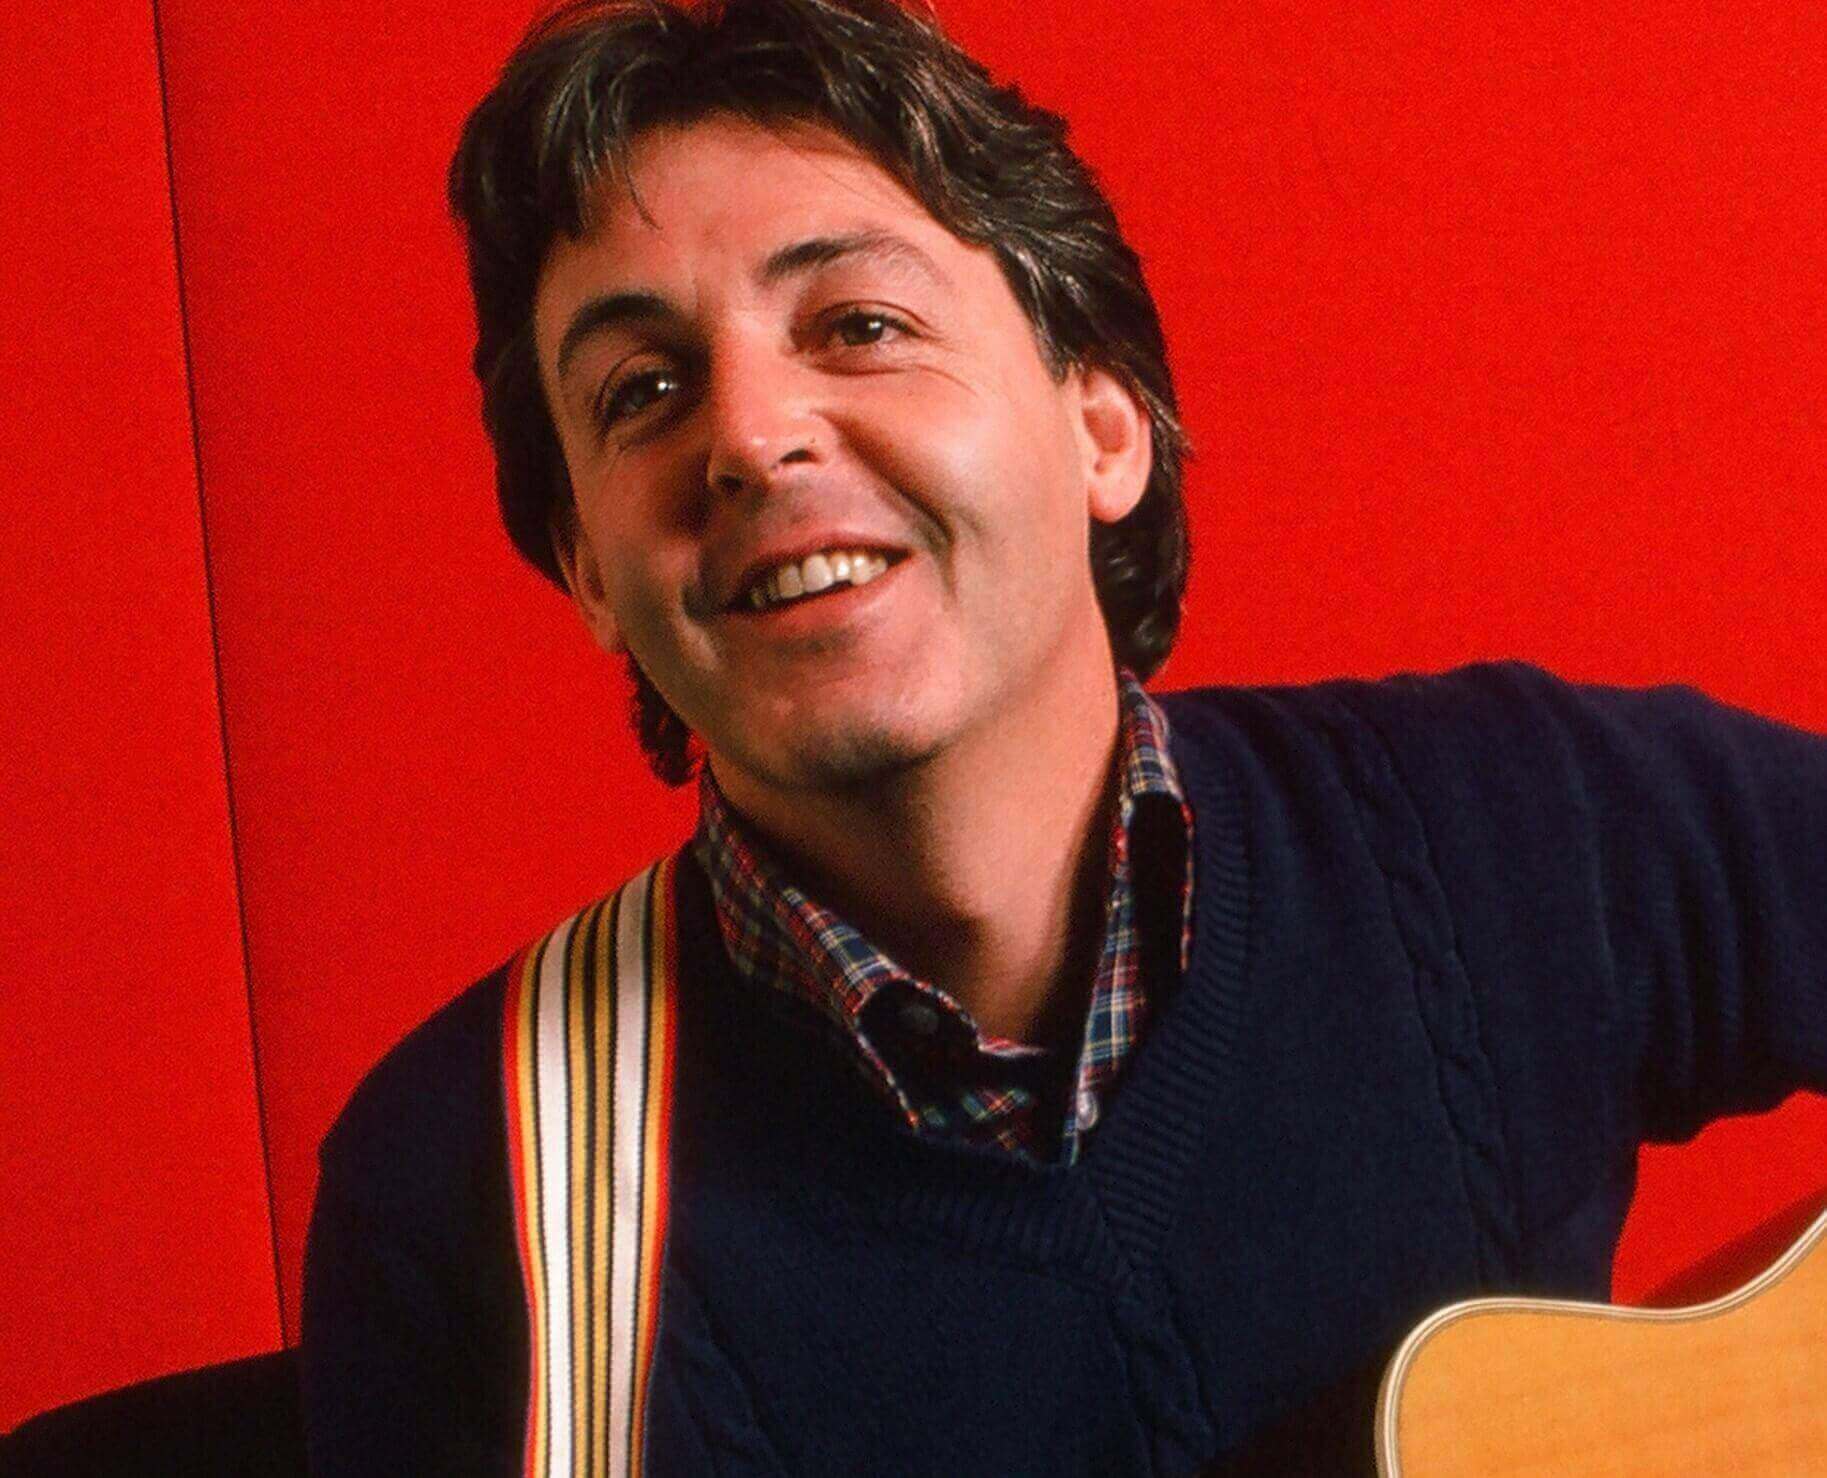 Paul McCartney with a red backdrop